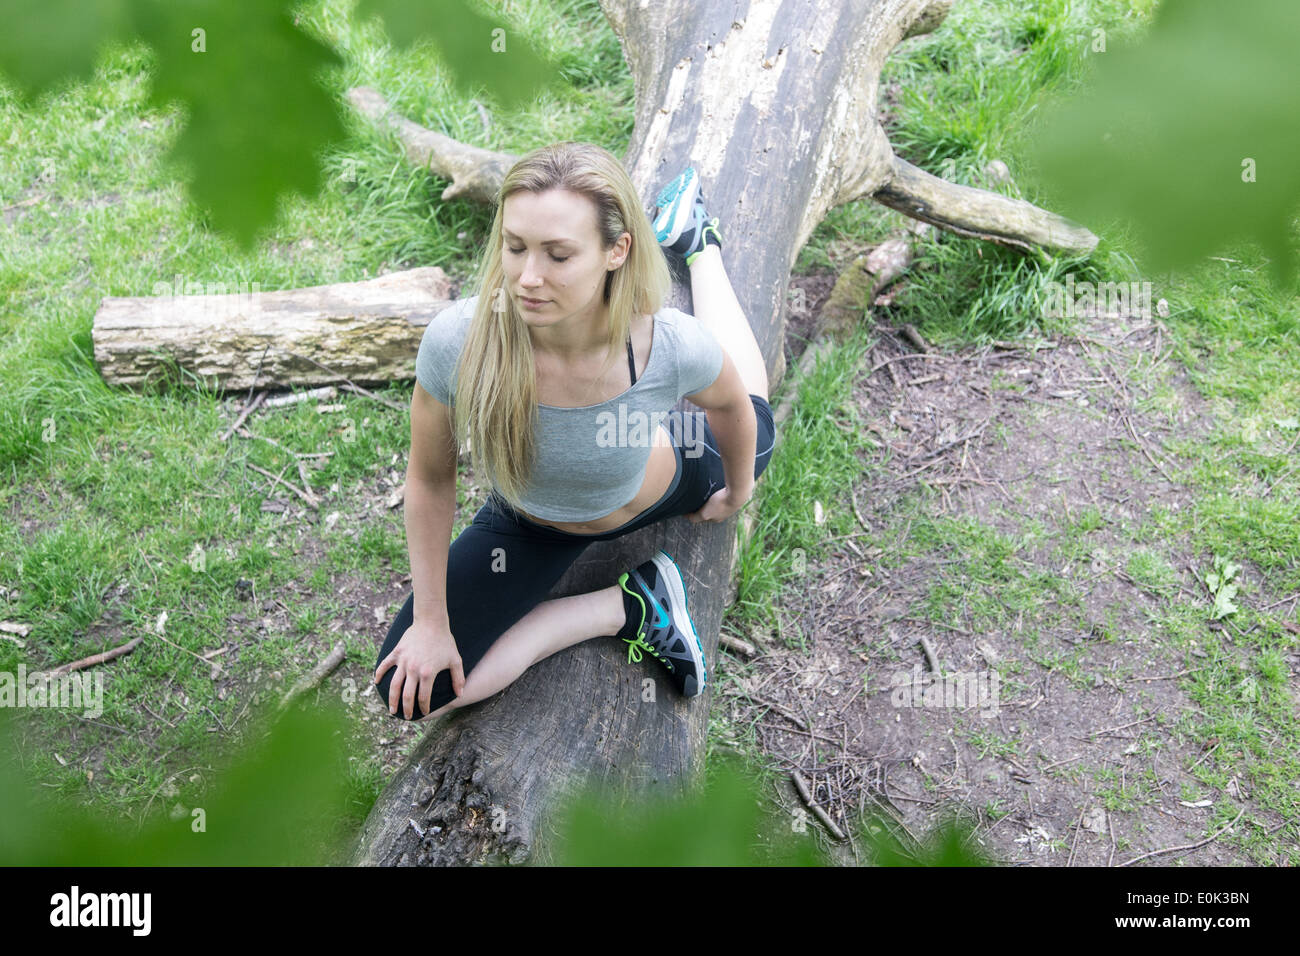 Blonde lady wearing black leggings and a grey crop top with eyes closed practicing yoga on a log on hampstead heath. Stock Photo